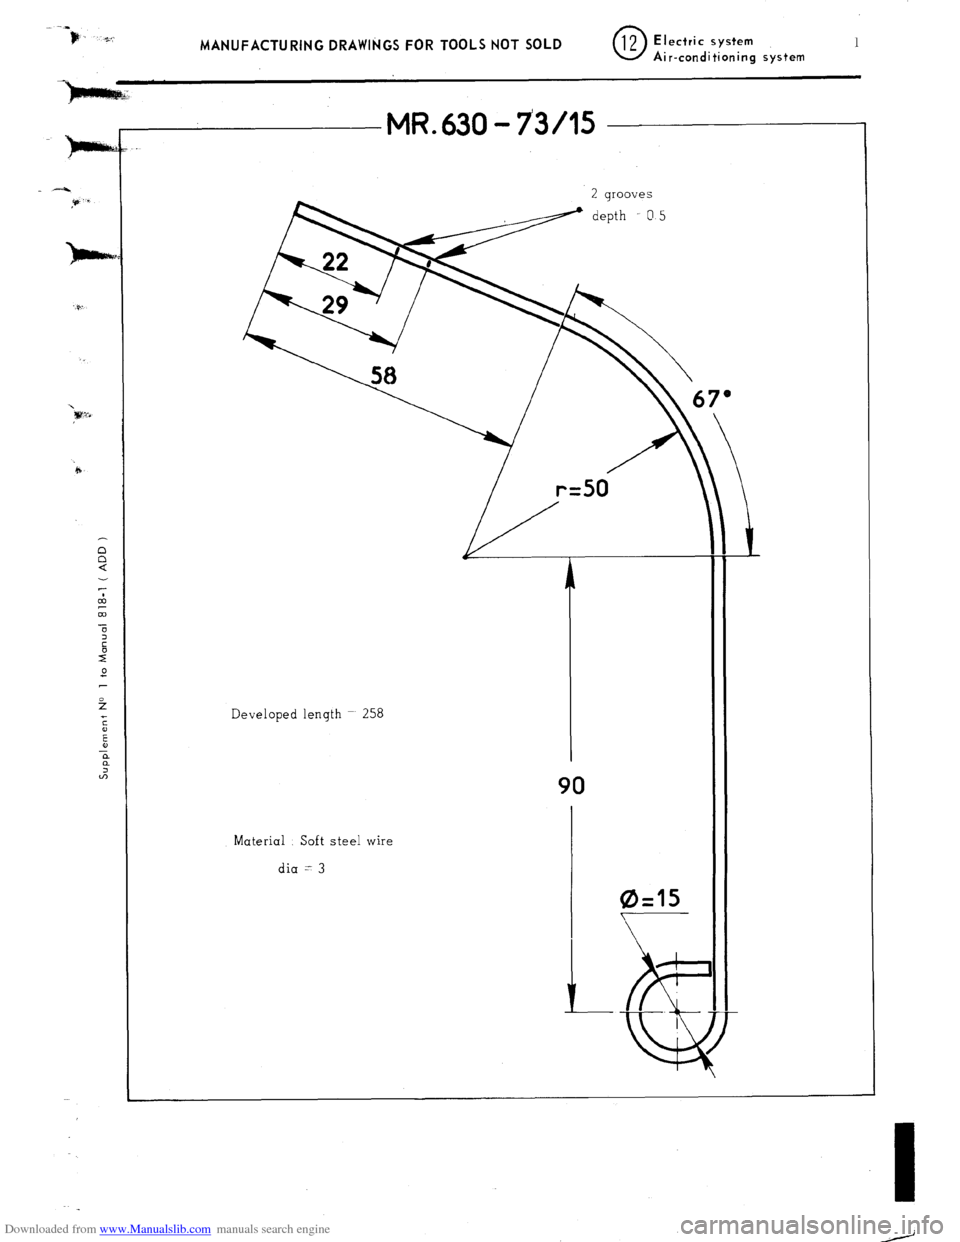 Citroen CX 1981 1.G Workshop Manual Downloaded from www.Manualslib.com manuals search engine MANUFACTURING DRAWINGS FOR TOOLS NOT SOLD 0 12 Electric system 1 Air-conditioning system n 
n 
a 
MR. 630 - 7305 
Developed length ~ 258 
Mater